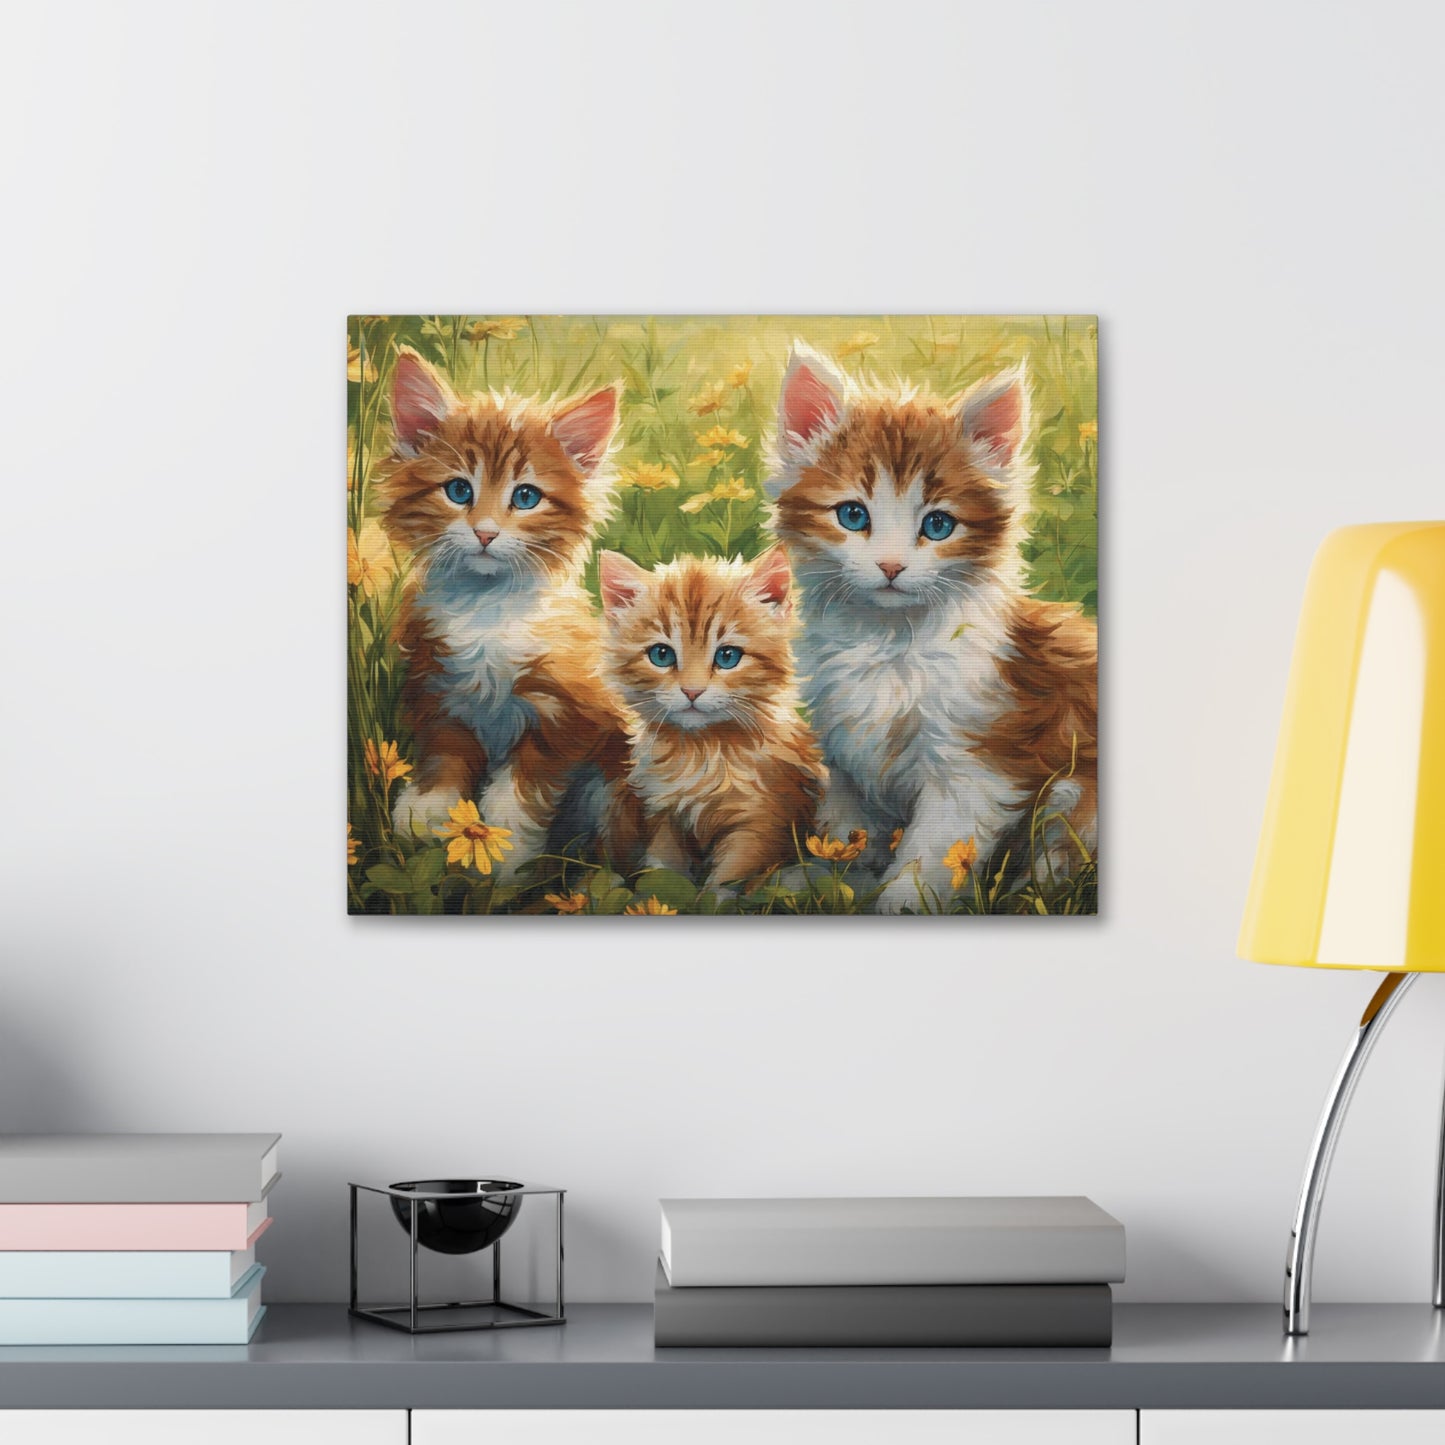 “Three Little Kittens in a Field of Daisies”